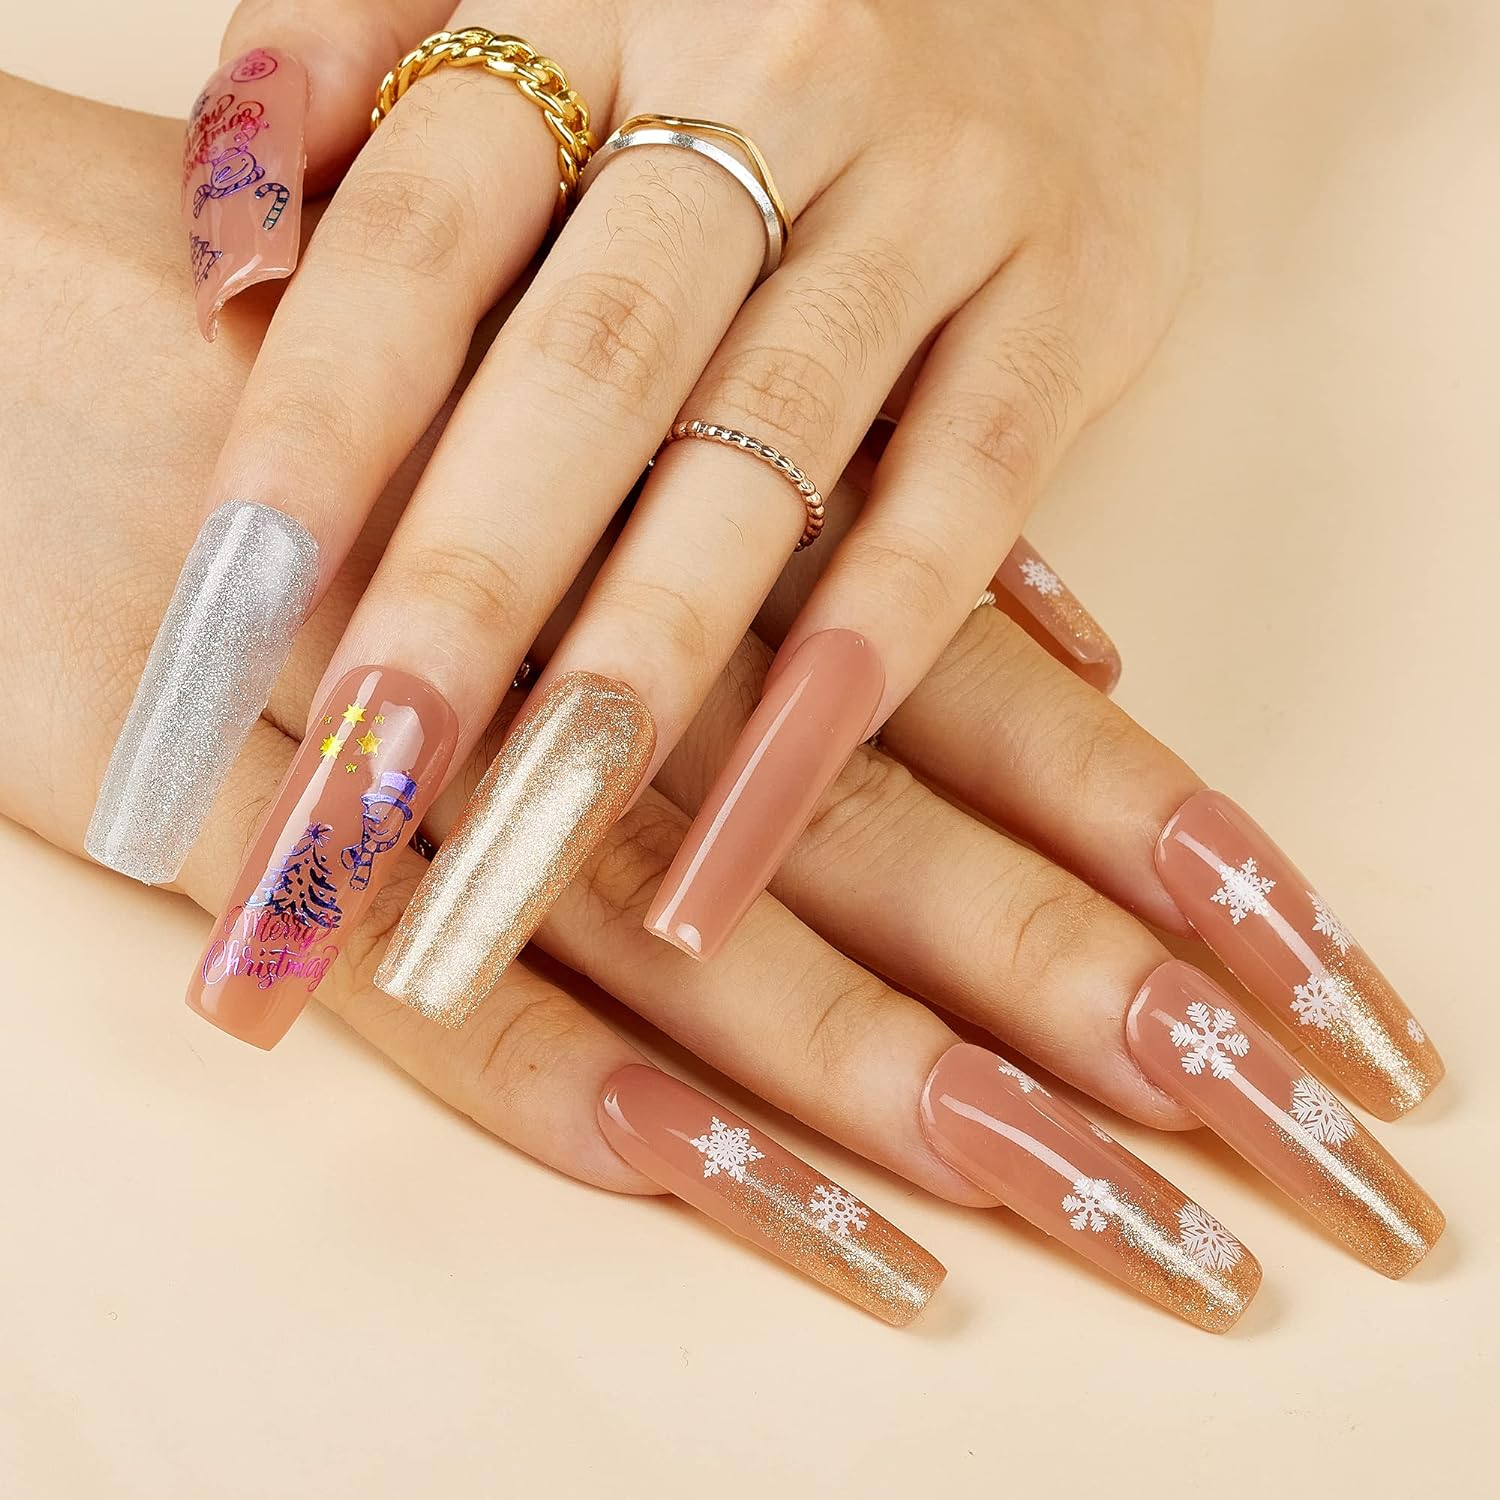 Caramel Swirl Collections Poly Gel Nail Kit